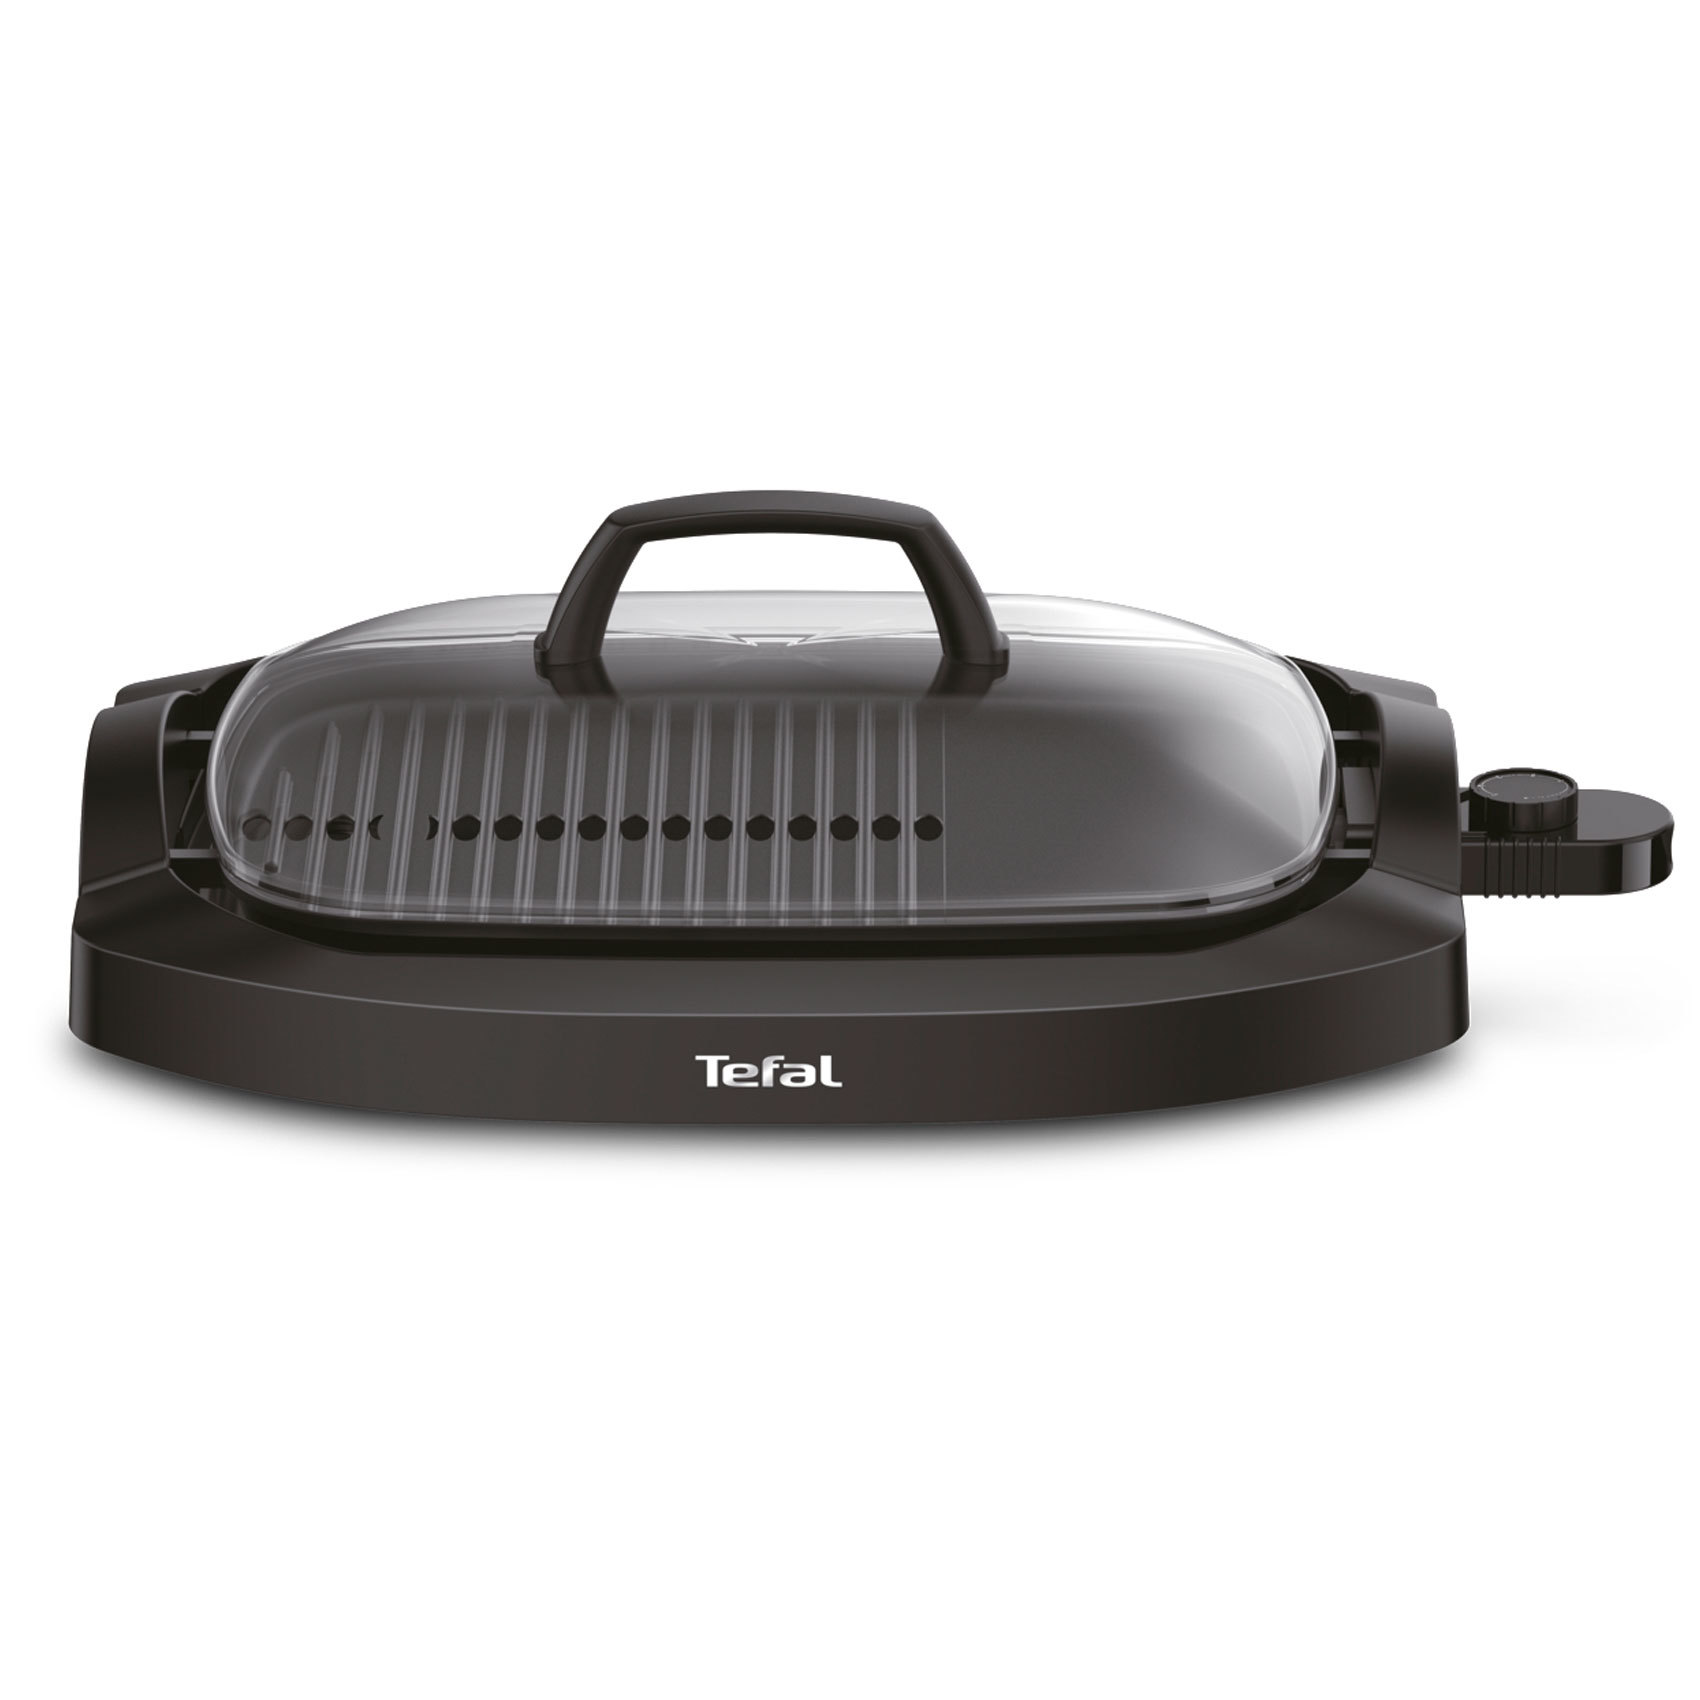 Buy Tefal Electric Smokeless Plancha Grill Black CB6A0827 Online